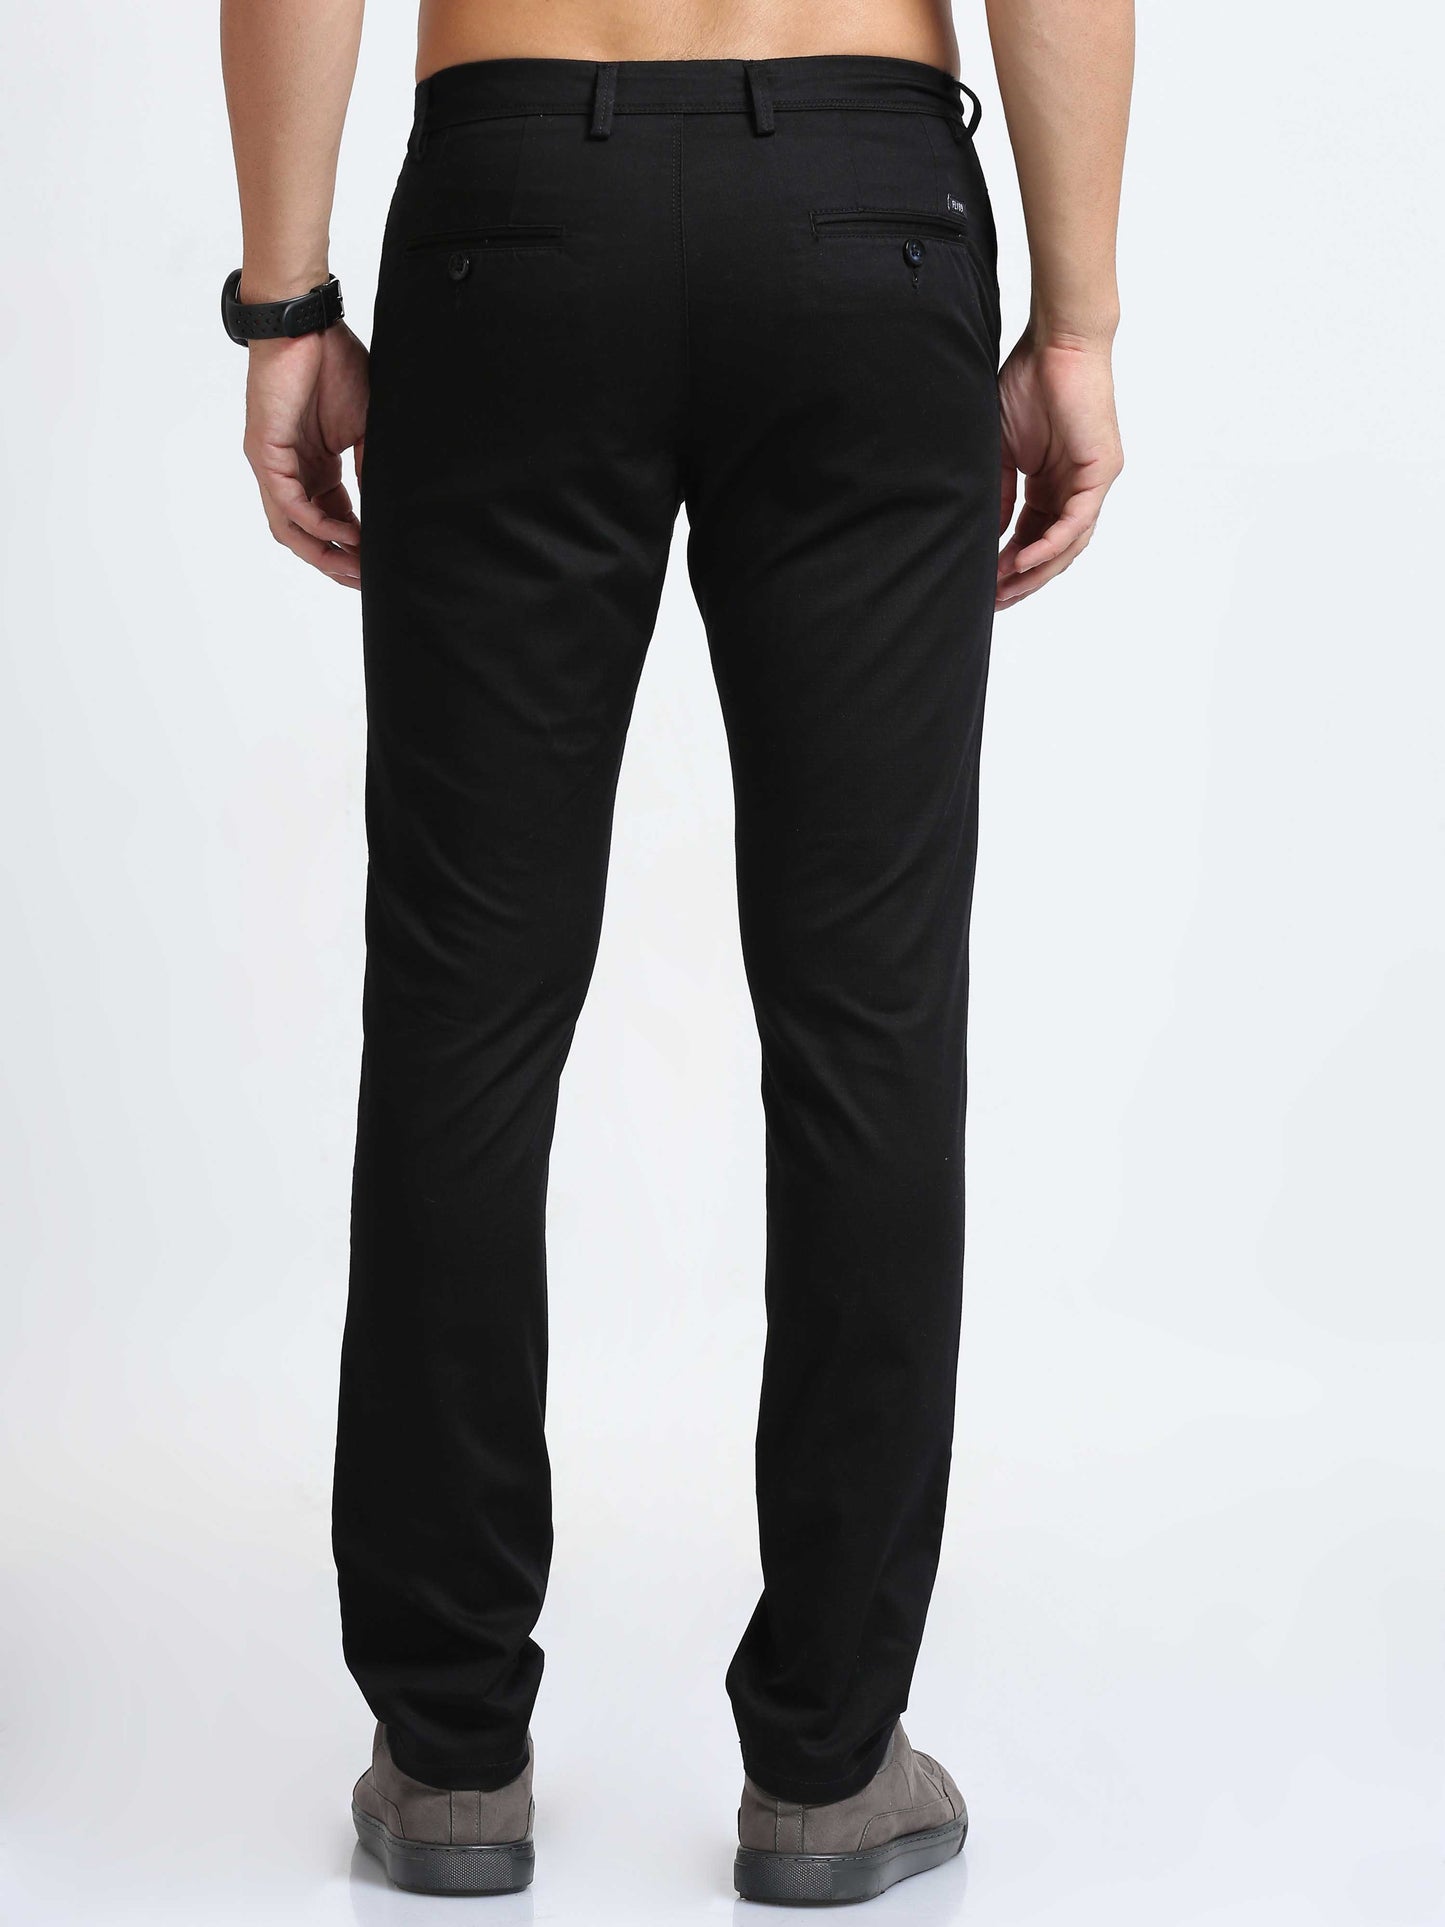 Black Imported Fabric Trouser